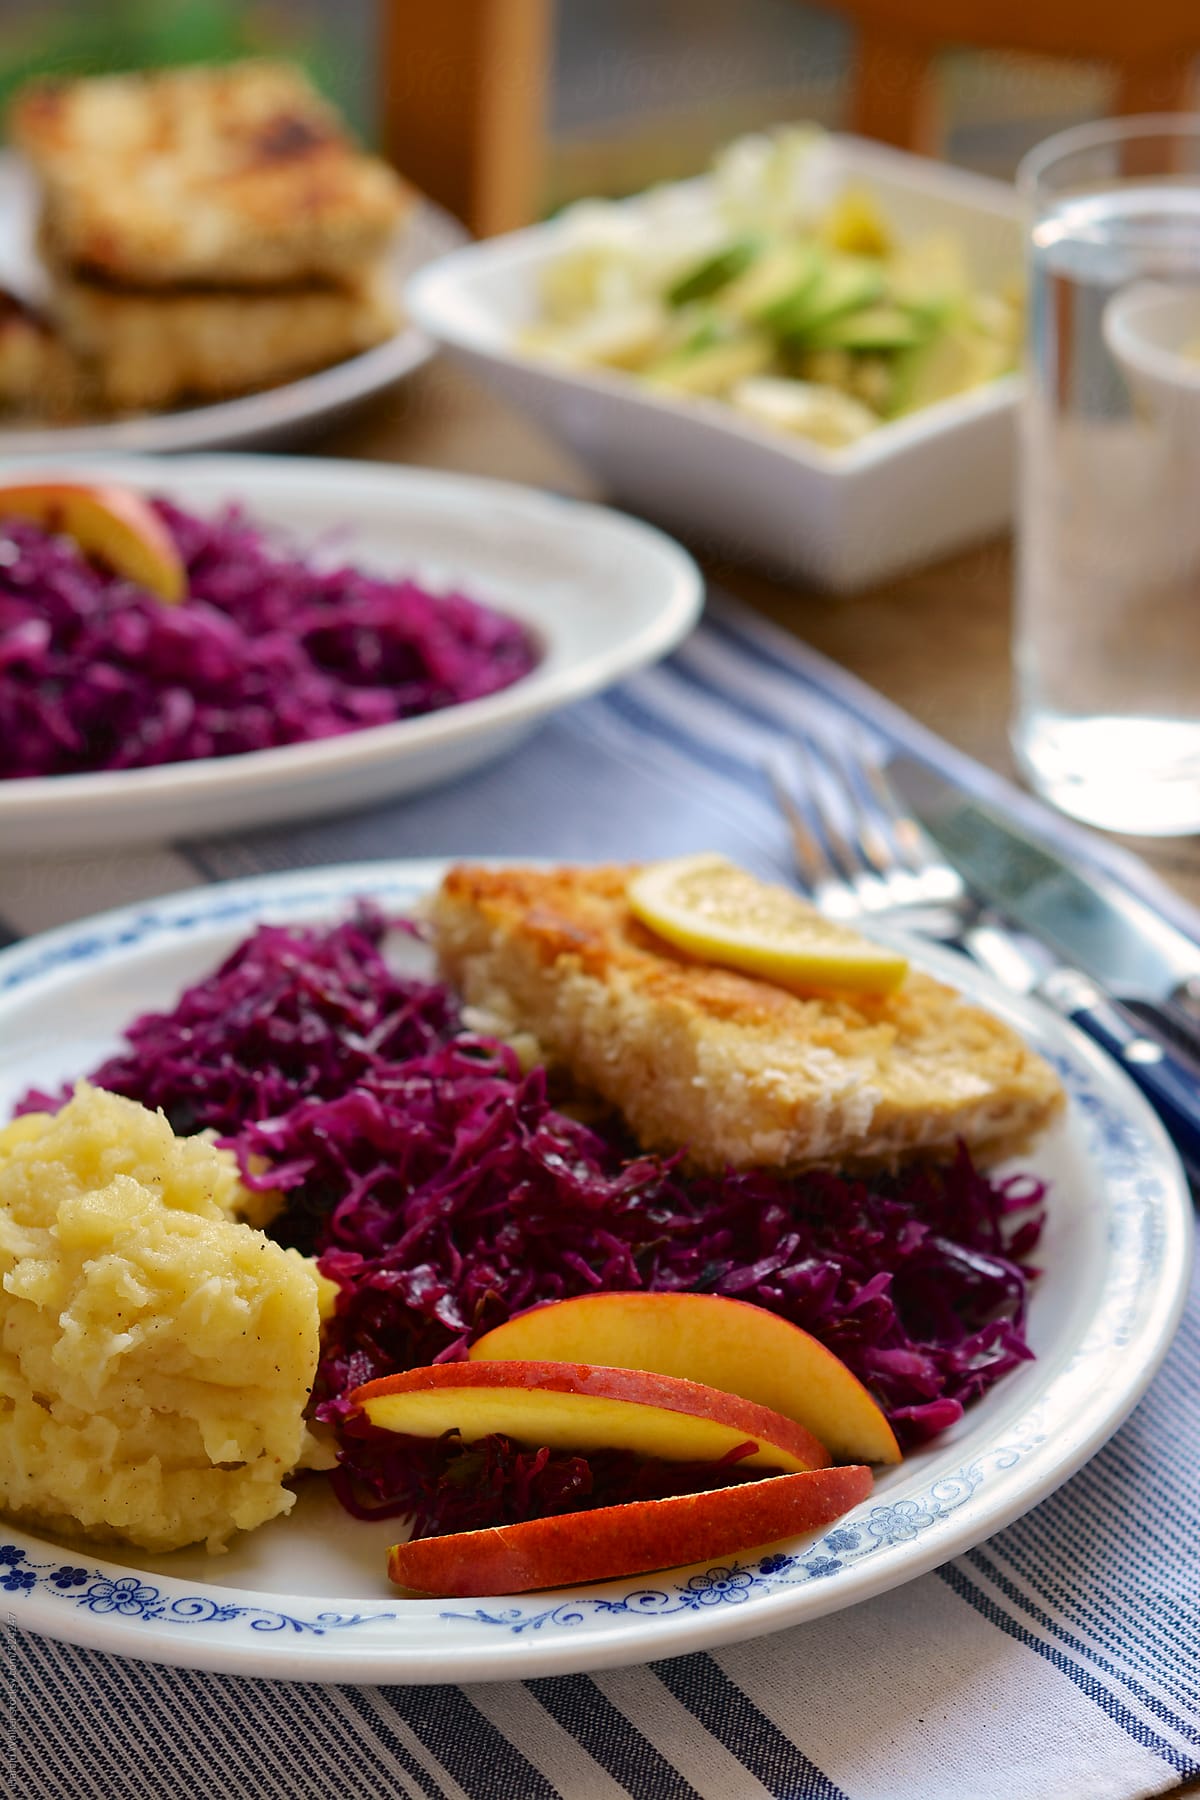 Red cabbage, mashed potatoes and tempeh schnitzel